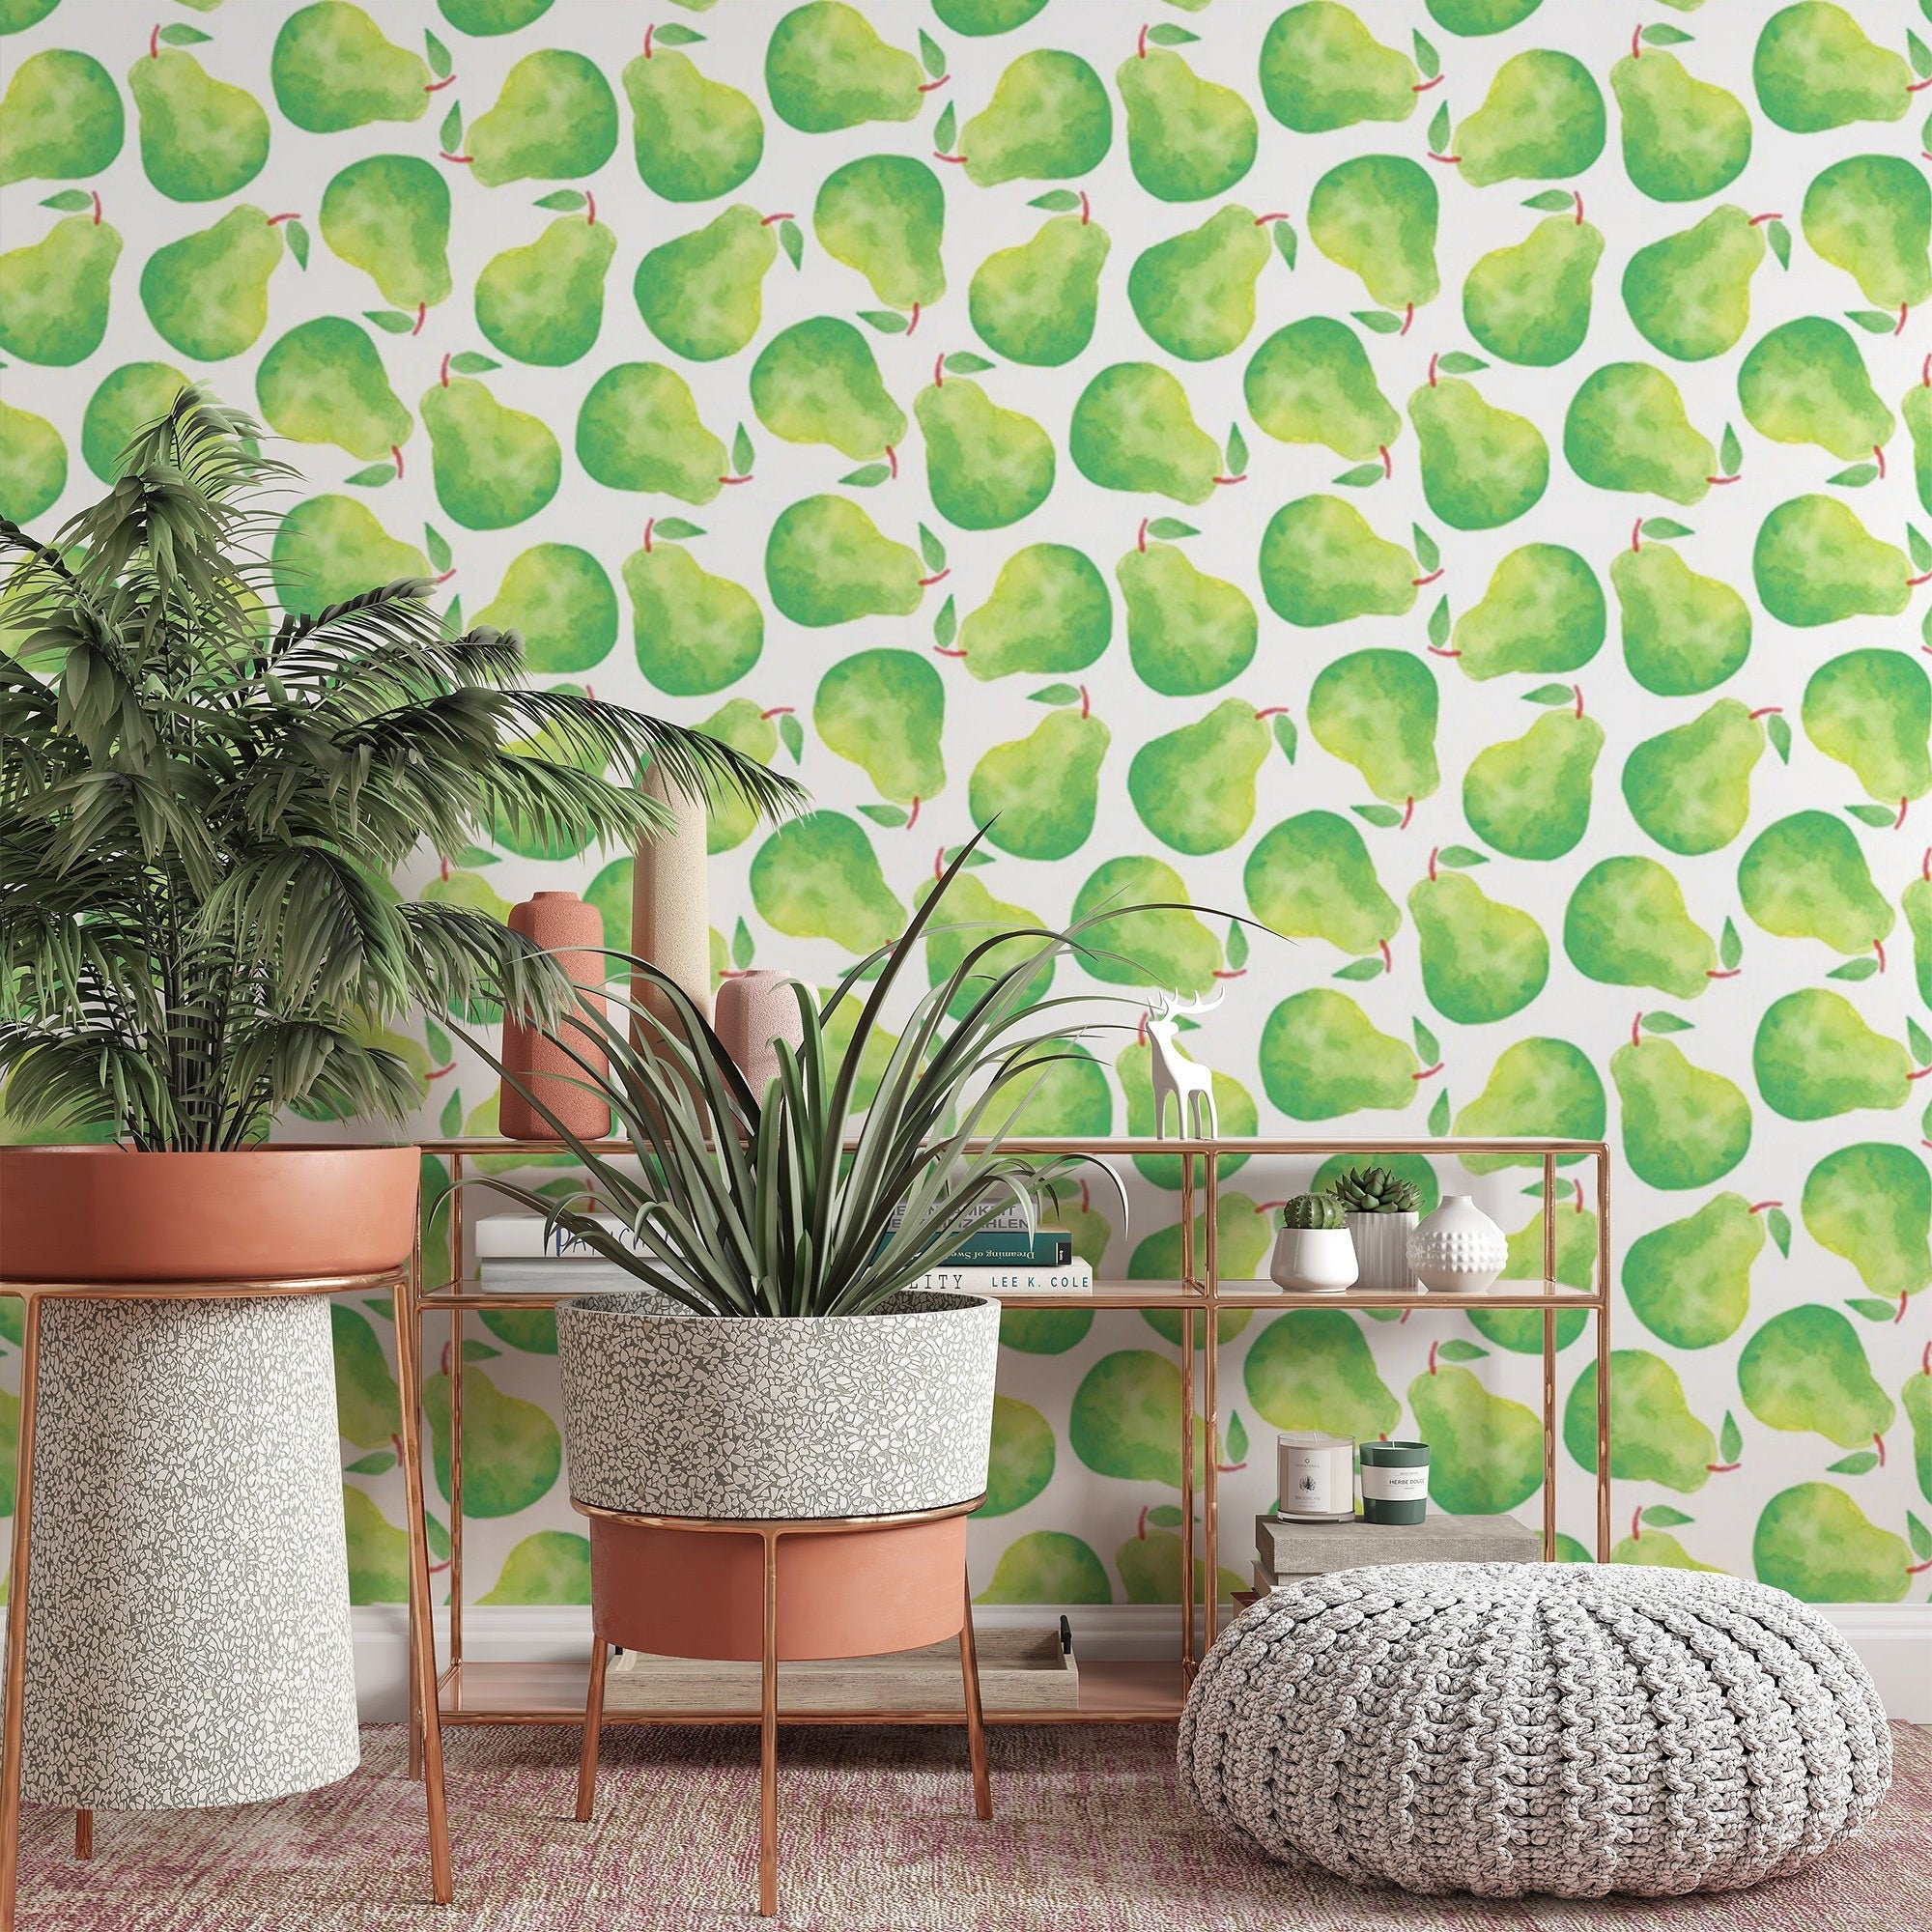 Cole and Son Woods and Pears Wallpaper - Approved Cole & Son Retailer